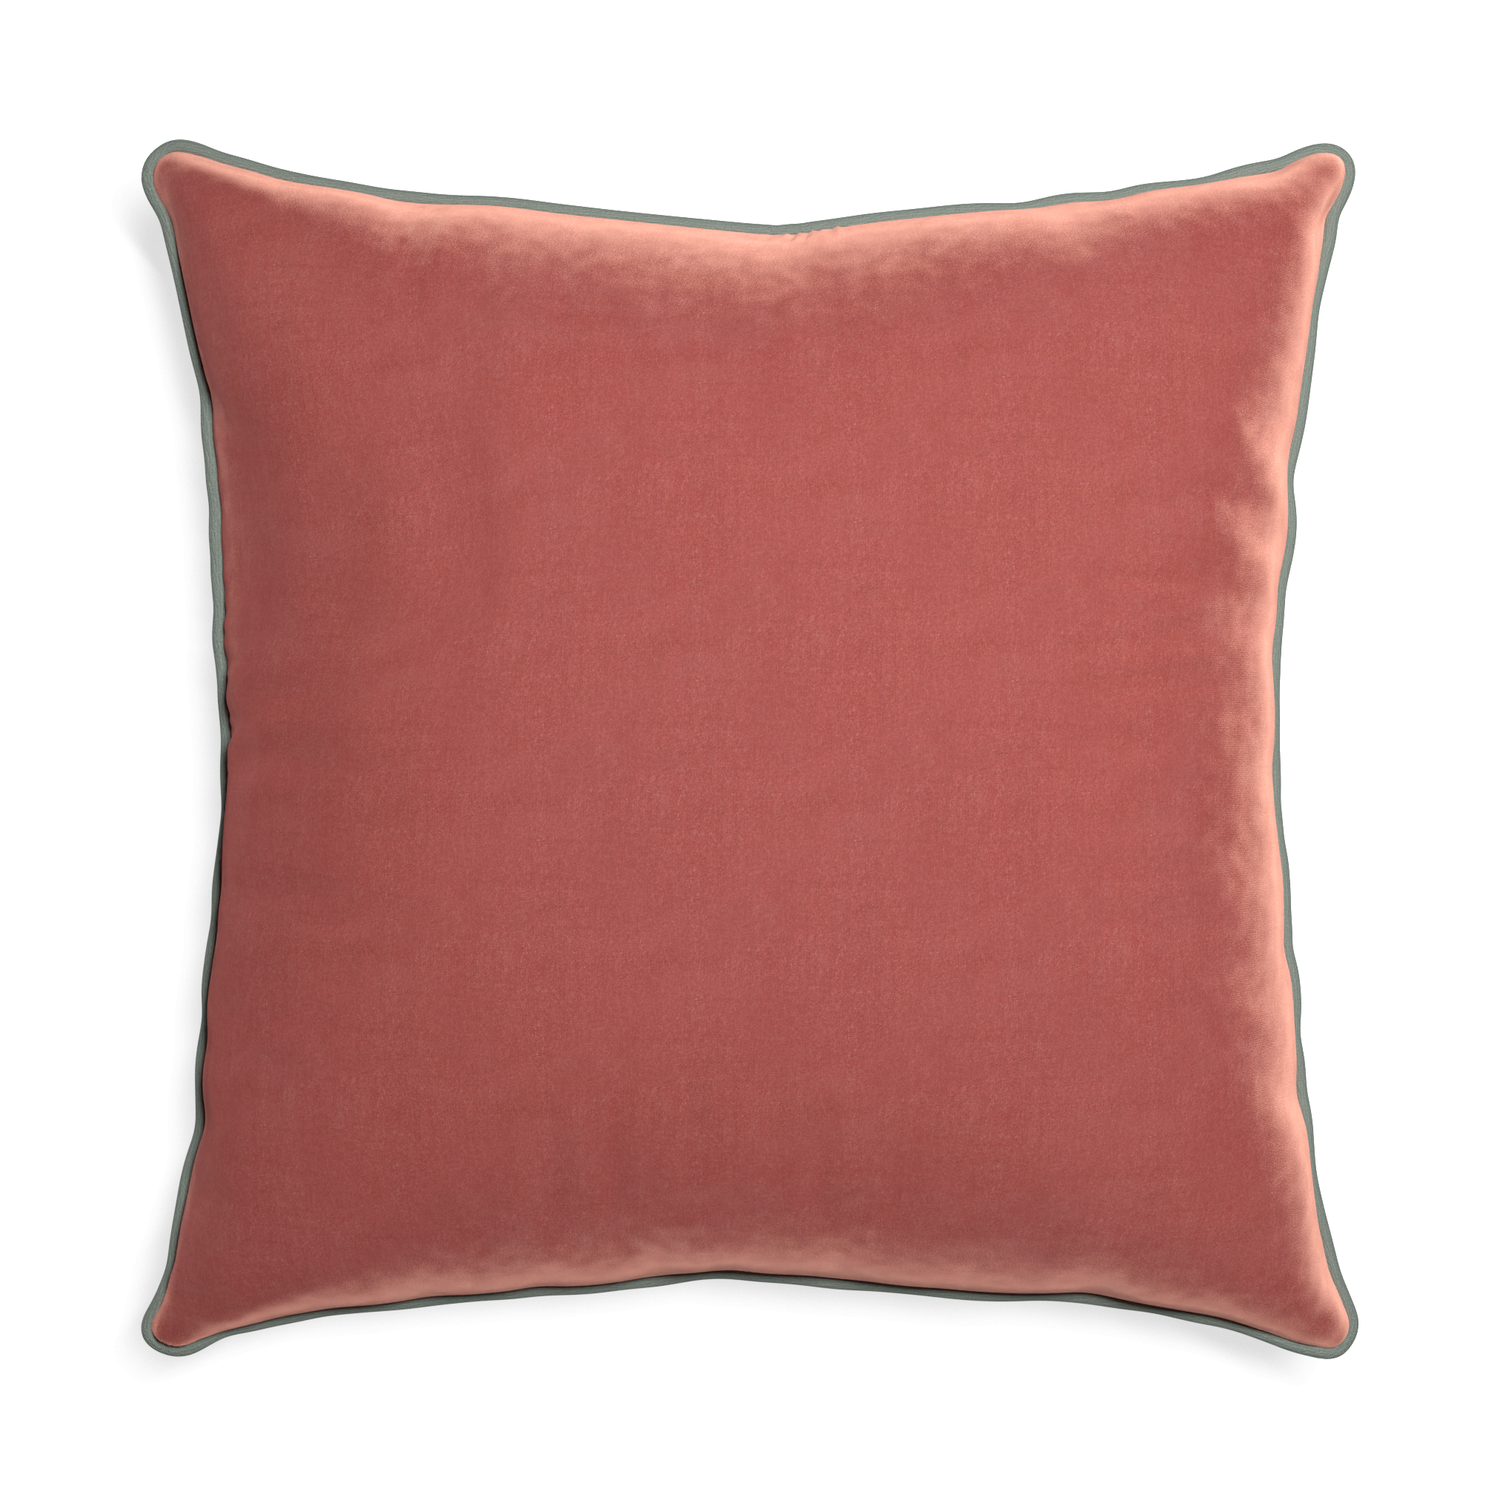 Euro-sham cosmo velvet custom coralpillow with sage piping on white background